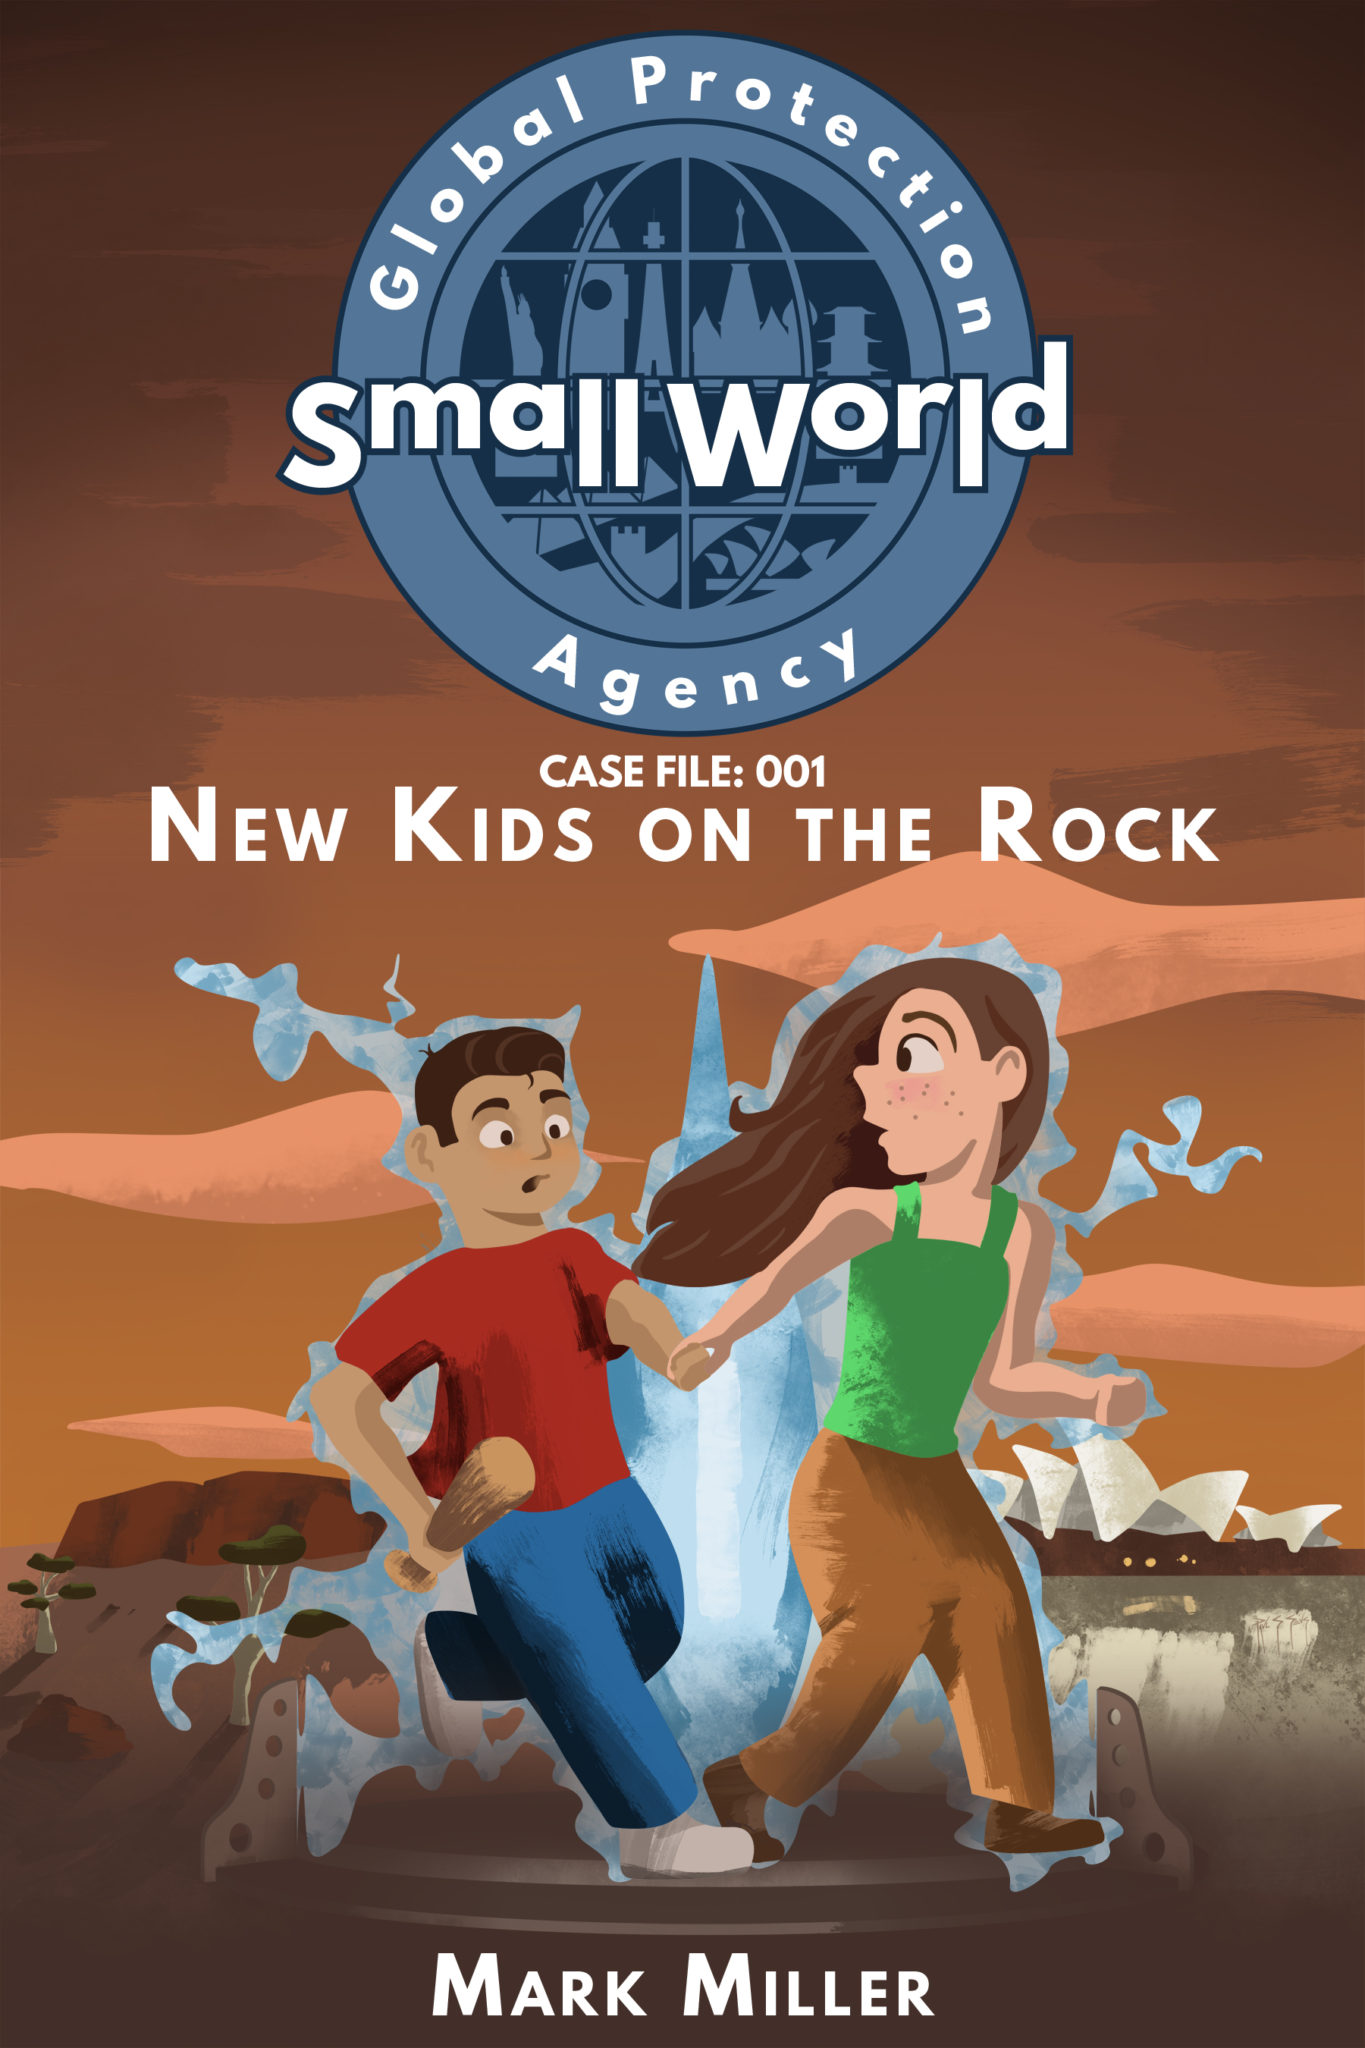 FREE: New Kids on the Rock by Mark Miller